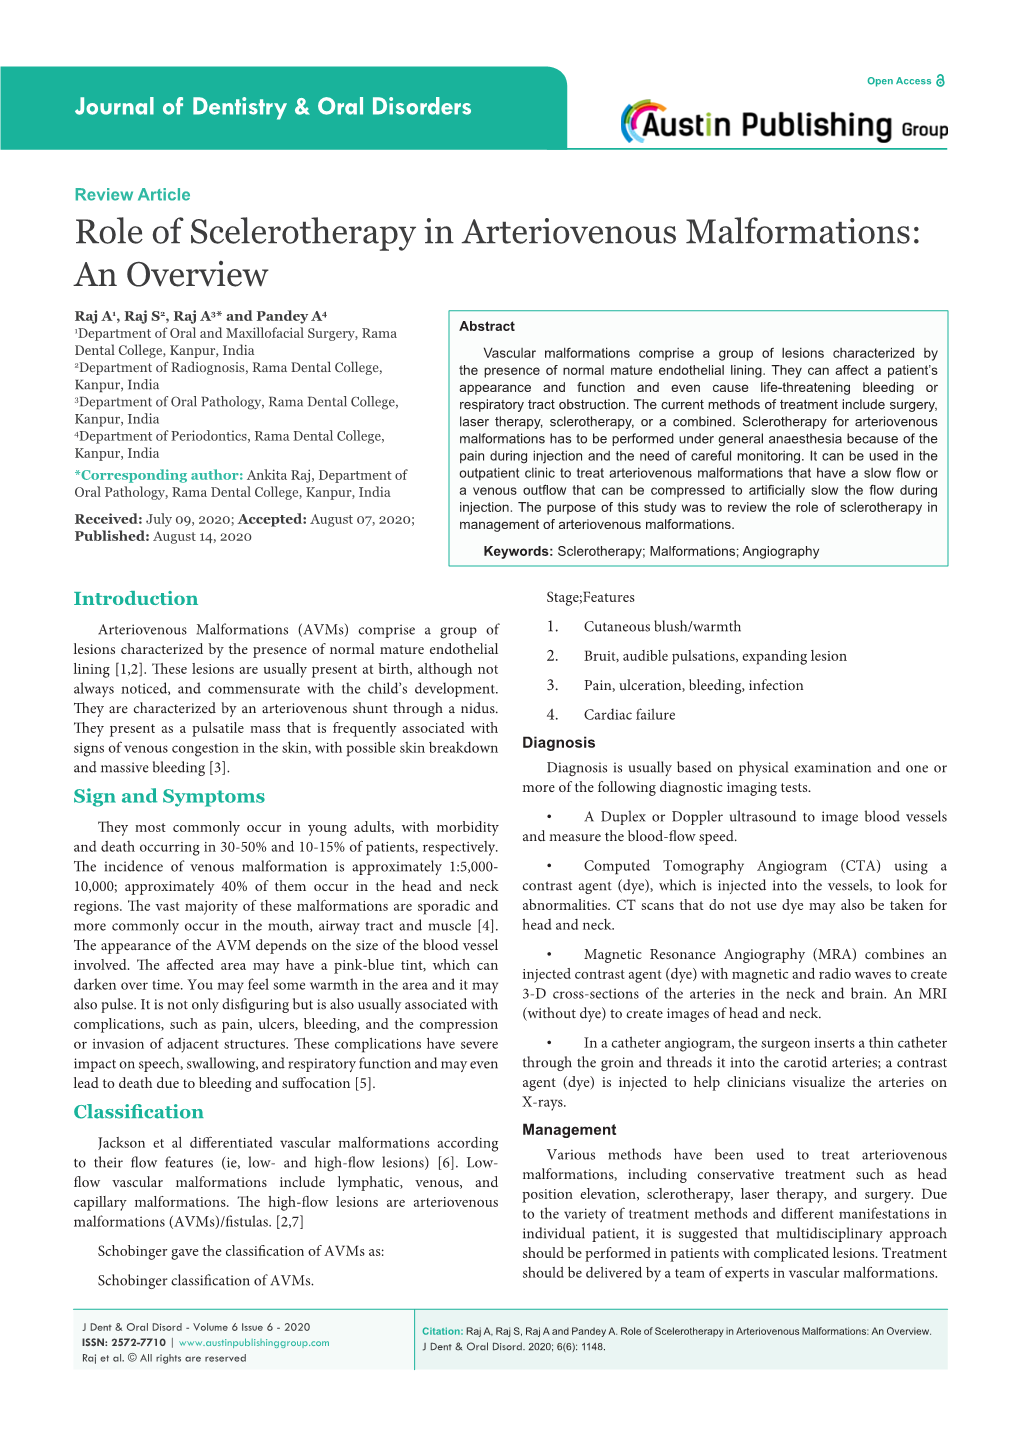 Role of Scelerotherapy in Arteriovenous Malformations: an Overview